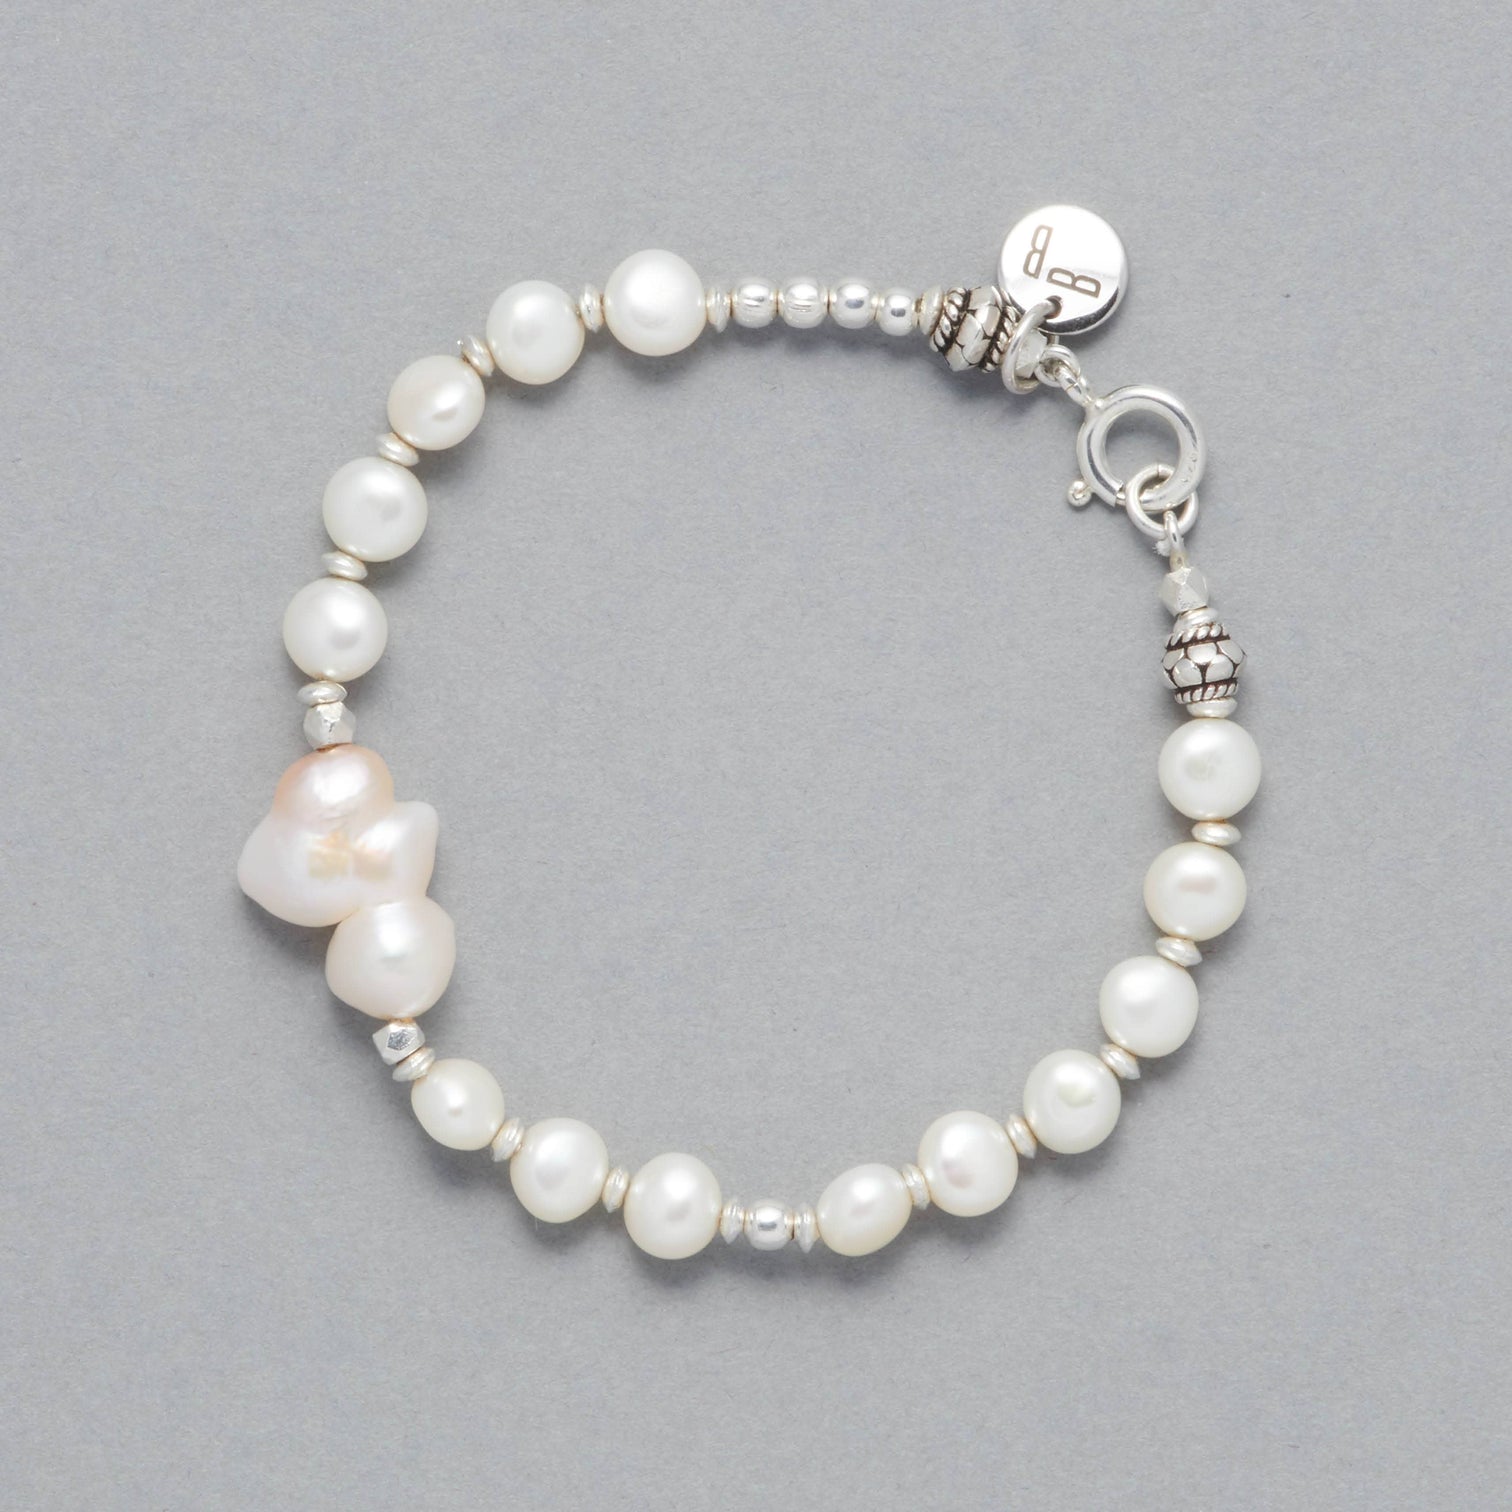 Buy Pearl Bracelets for Women, Womens Gold Bracelets, 14k Gold Pearl  Bracelet, Small Dainty Bracelets for Women, Adjustable for Perfect fit,  Celebrity-Approved Gold bracelets for Women, Awesome Gifts for All Occasion  Online